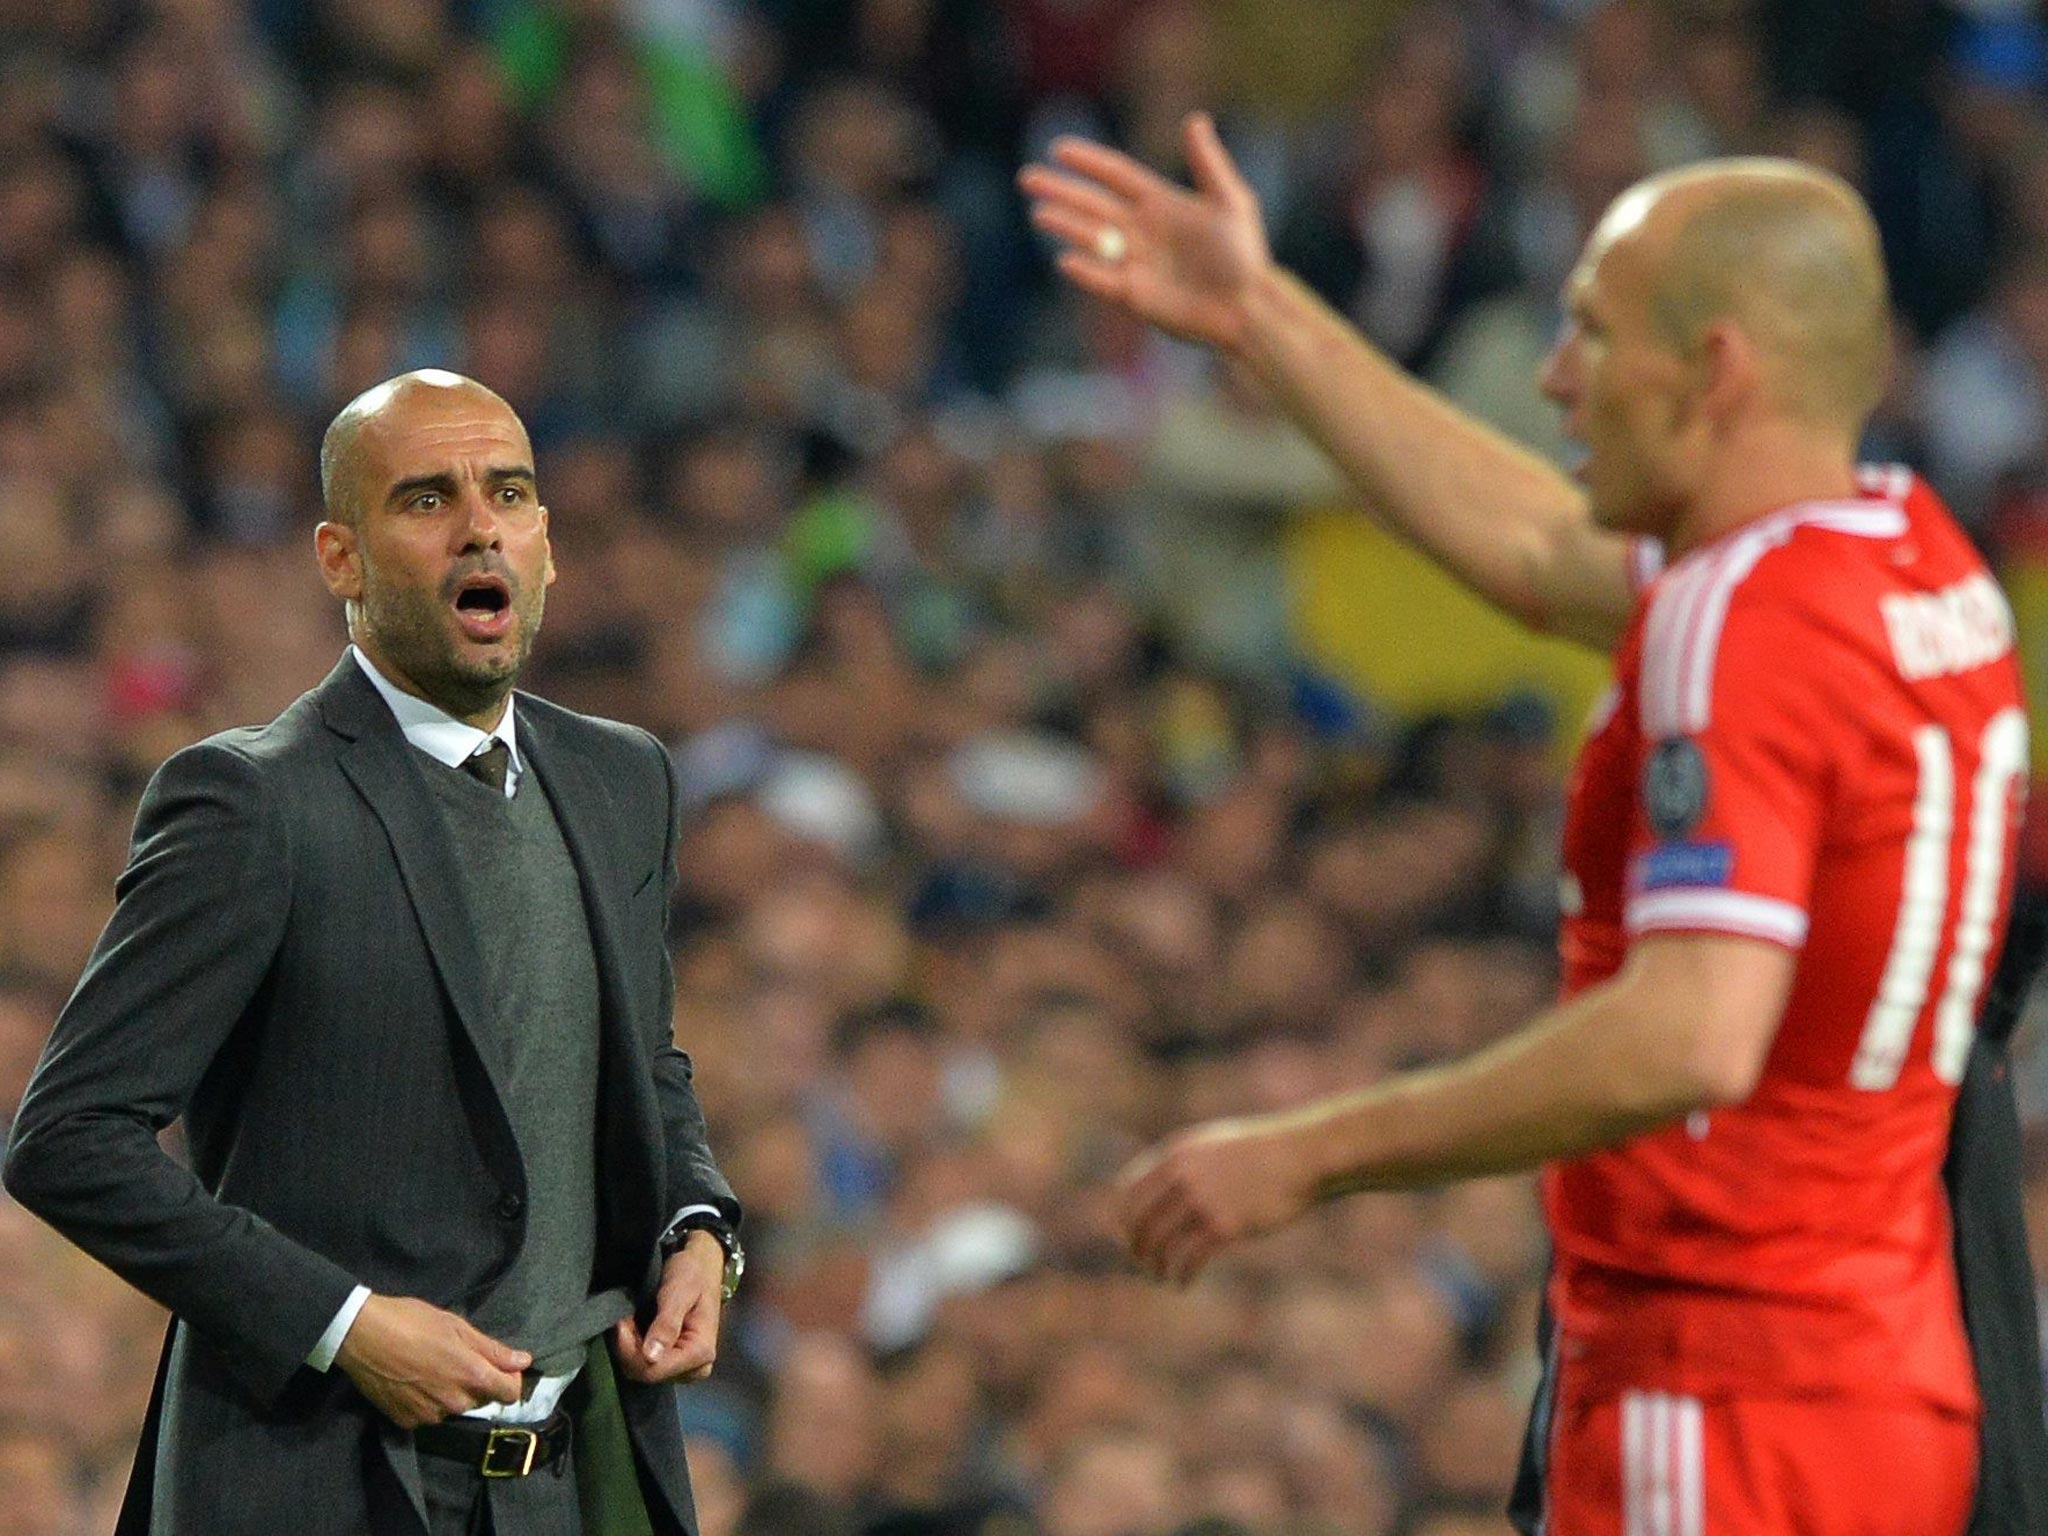 Pep Guardiola shouts out orders to Arjen Robben during Wednesday’s defeat